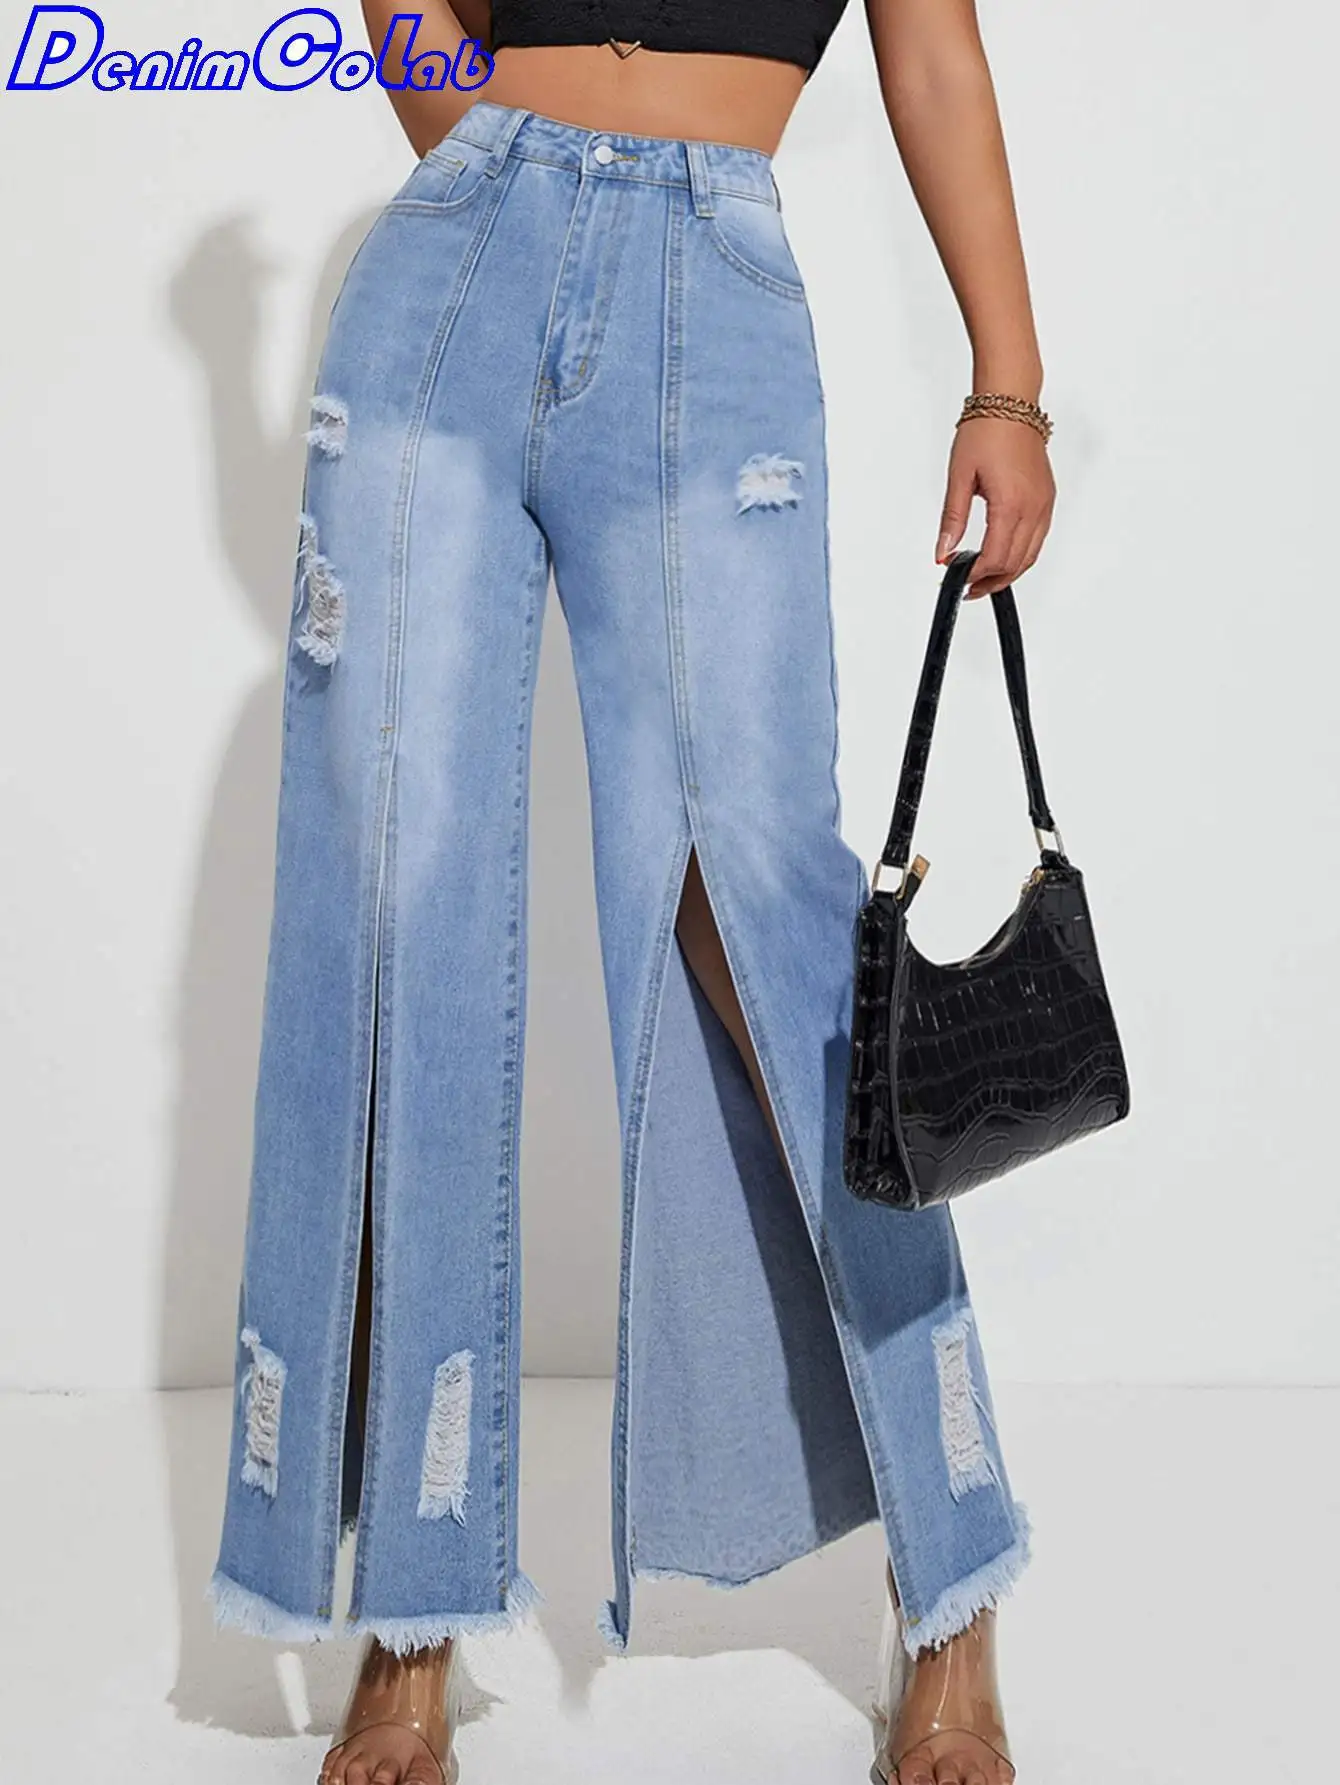 DenimColab 2022 New Fashion High Split Wide Leg Pants Woman Loose Hole Jeans Ladies Streetwear Fringe Ripped Jeans Trousers